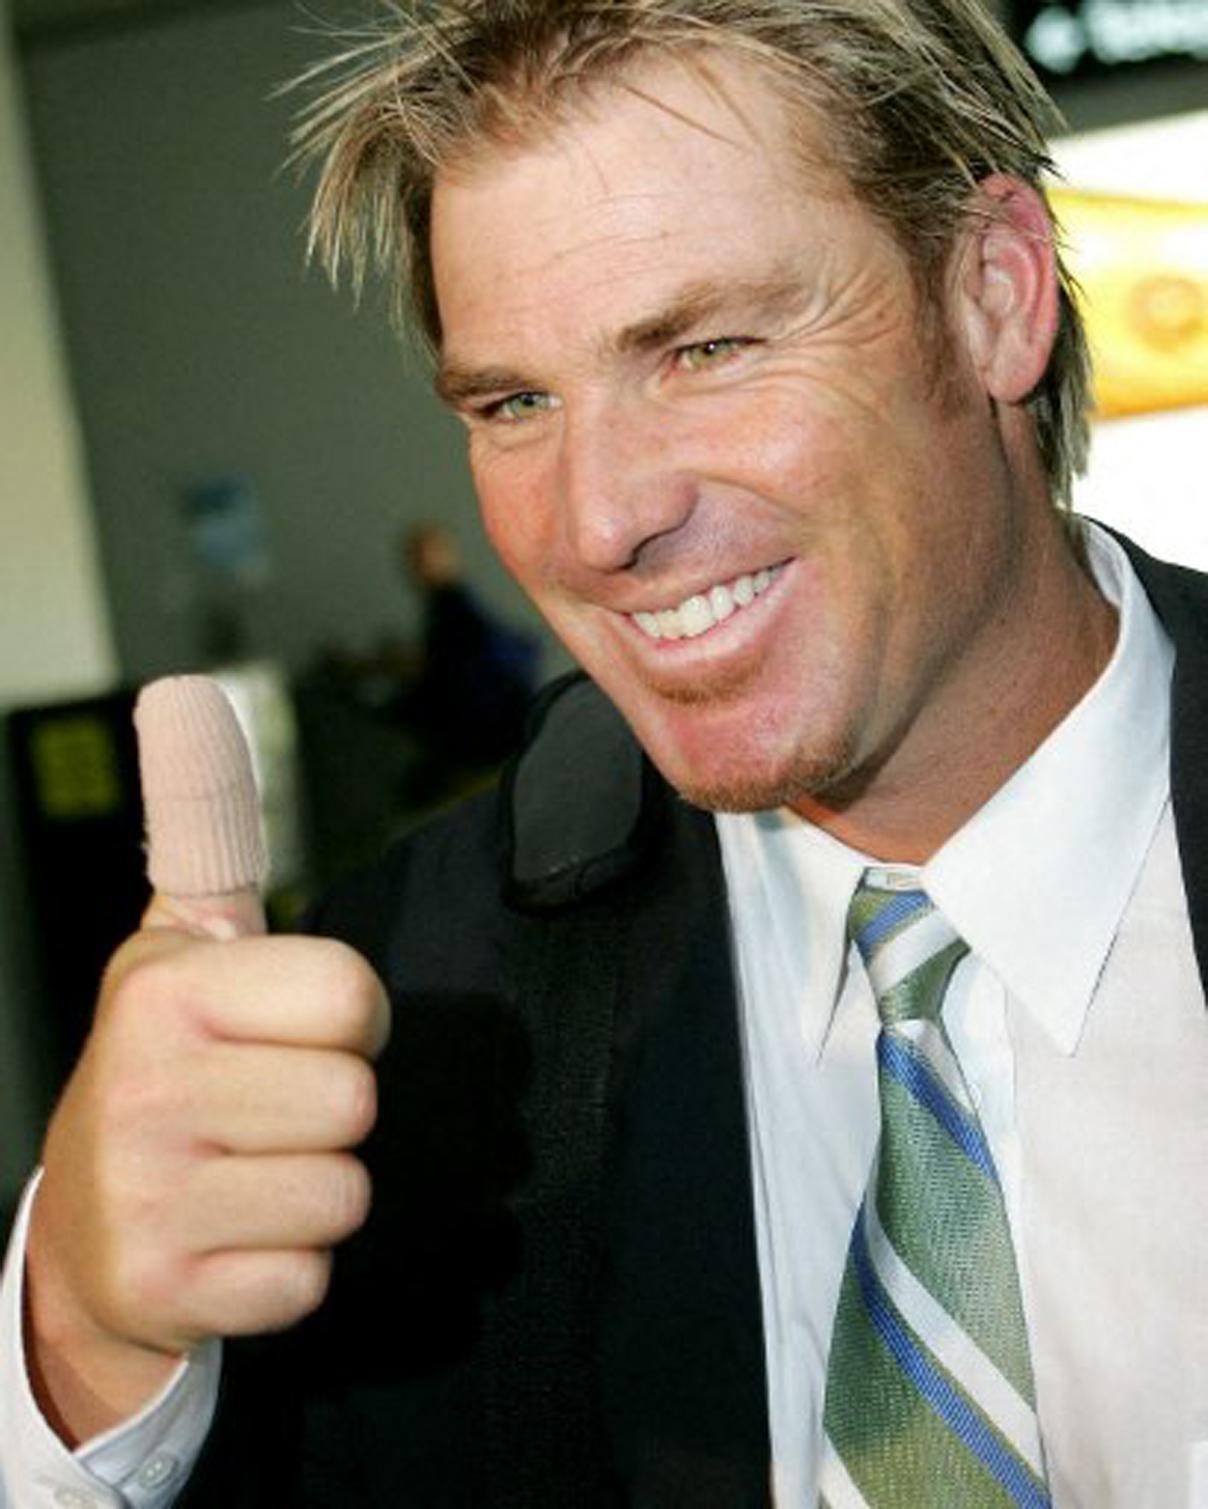 In 2013, Shane Warne was inducted into the ICC Cricket Hall of Fame.